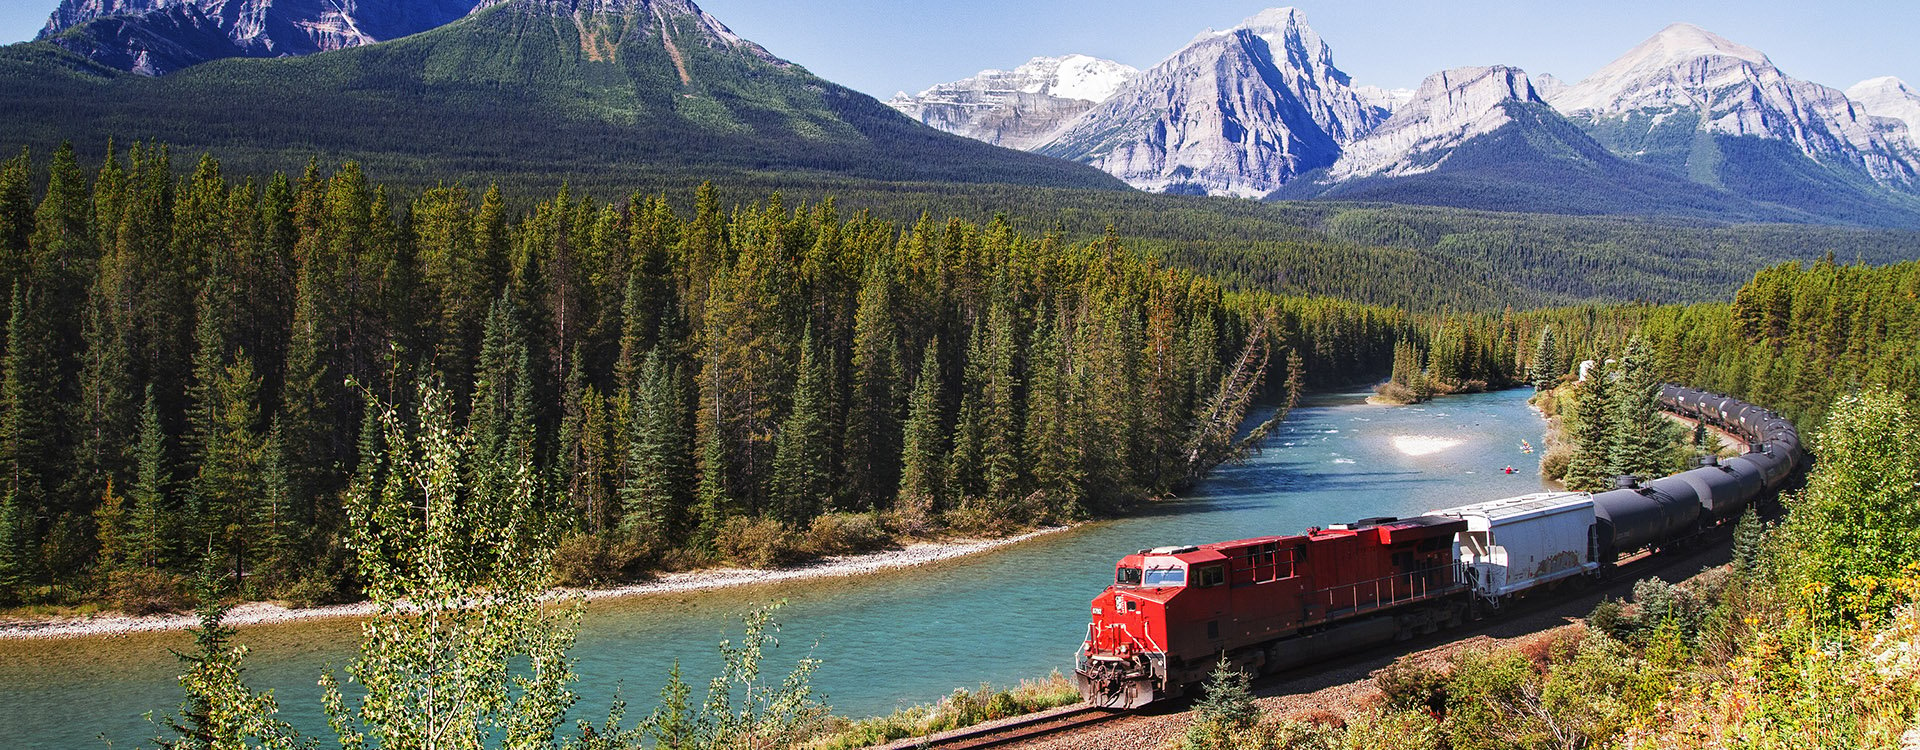 Train passing through Bow valley under the surveillance of mighty Rocky Mountain